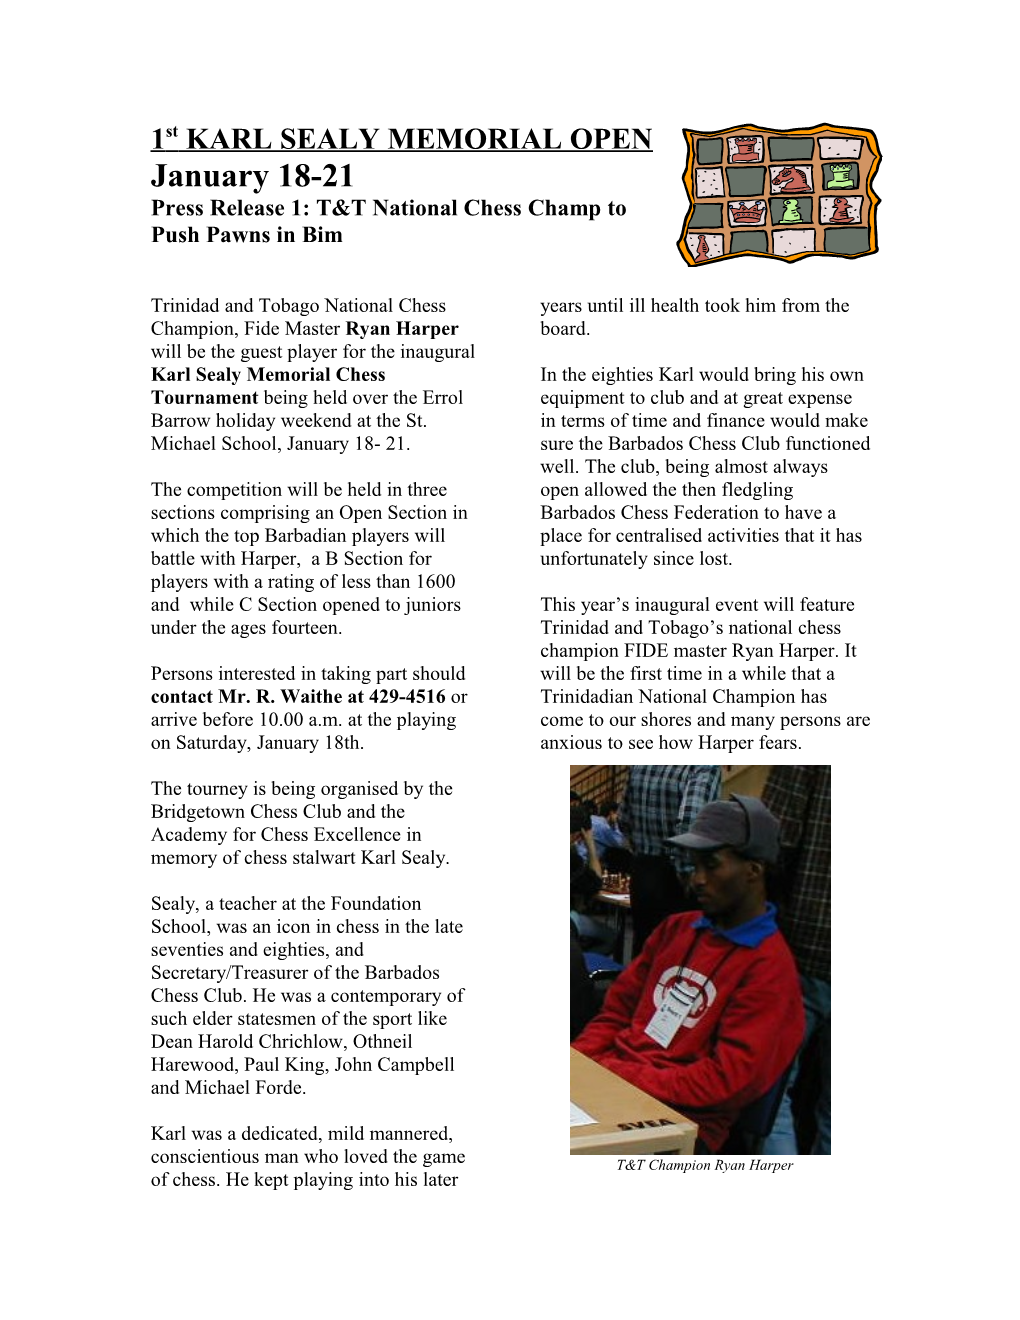 Press Release 1: T&T National Chess Champ to Push Pawns in Bim